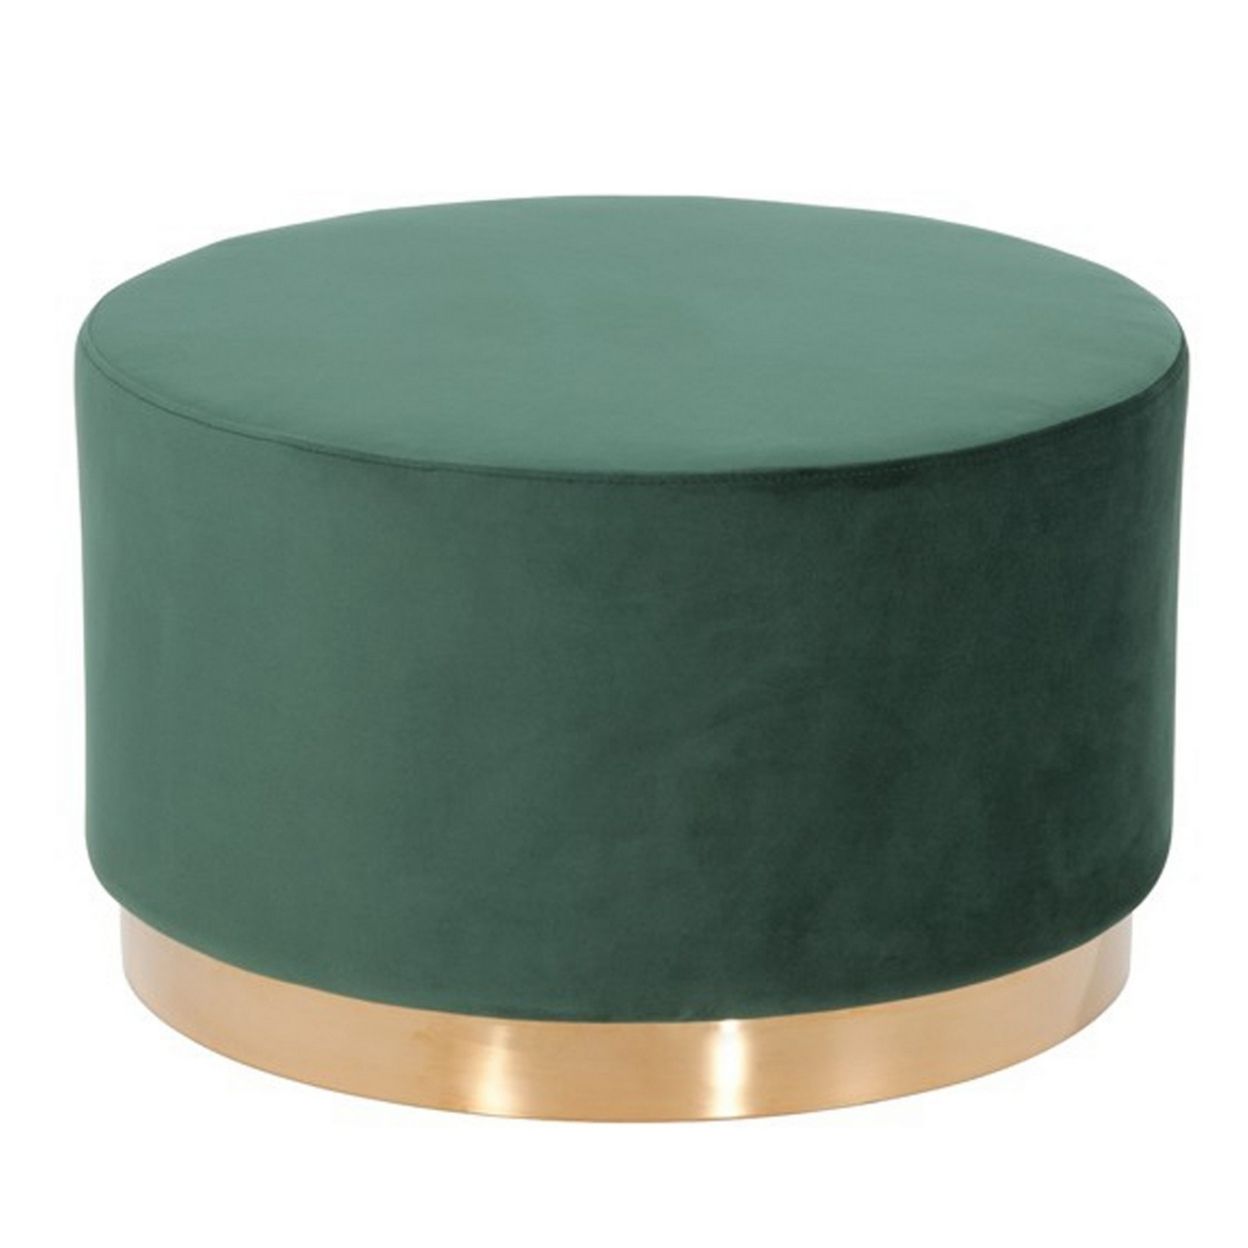 Most Popular Honeycomb Cream Velvet Fabric And Gold Metal Ottomans For Velvet Upholstered Ottoman With Steel Base, Small, Green And Gold (View 7 of 10)